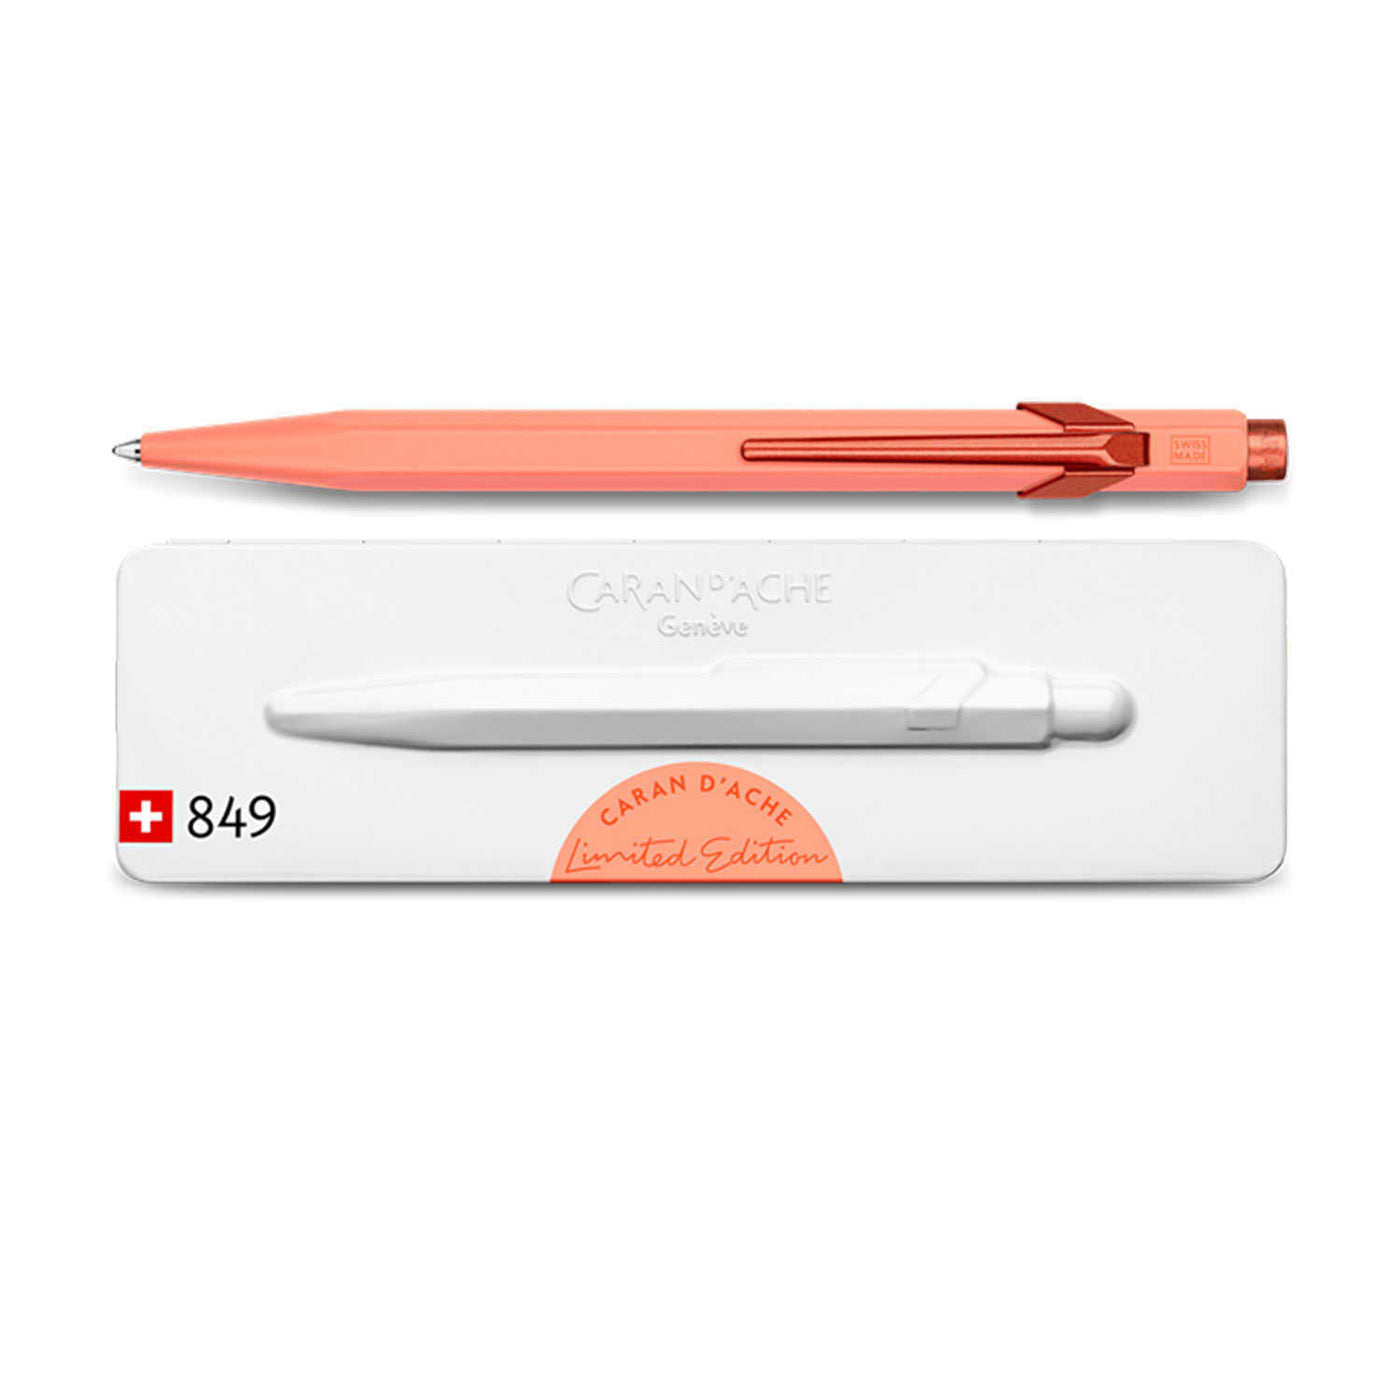 Caran d'Ache 849 Claim Your Style Ball Pen - Tangerine (Limited Edition) 2